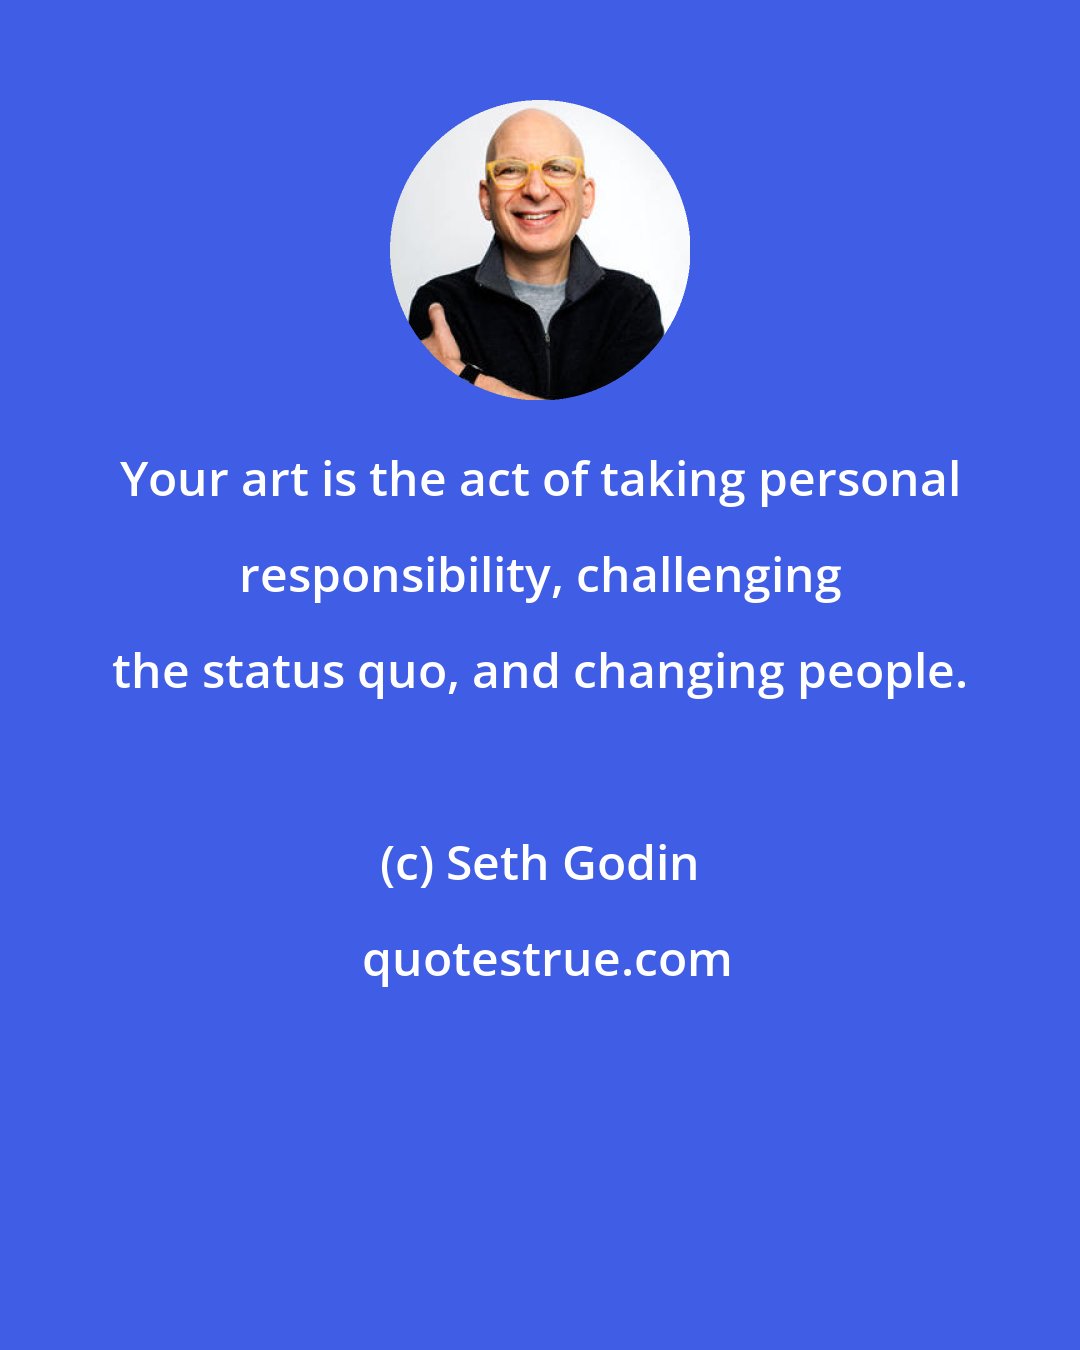 Seth Godin: Your art is the act of taking personal responsibility, challenging the status quo, and changing people.